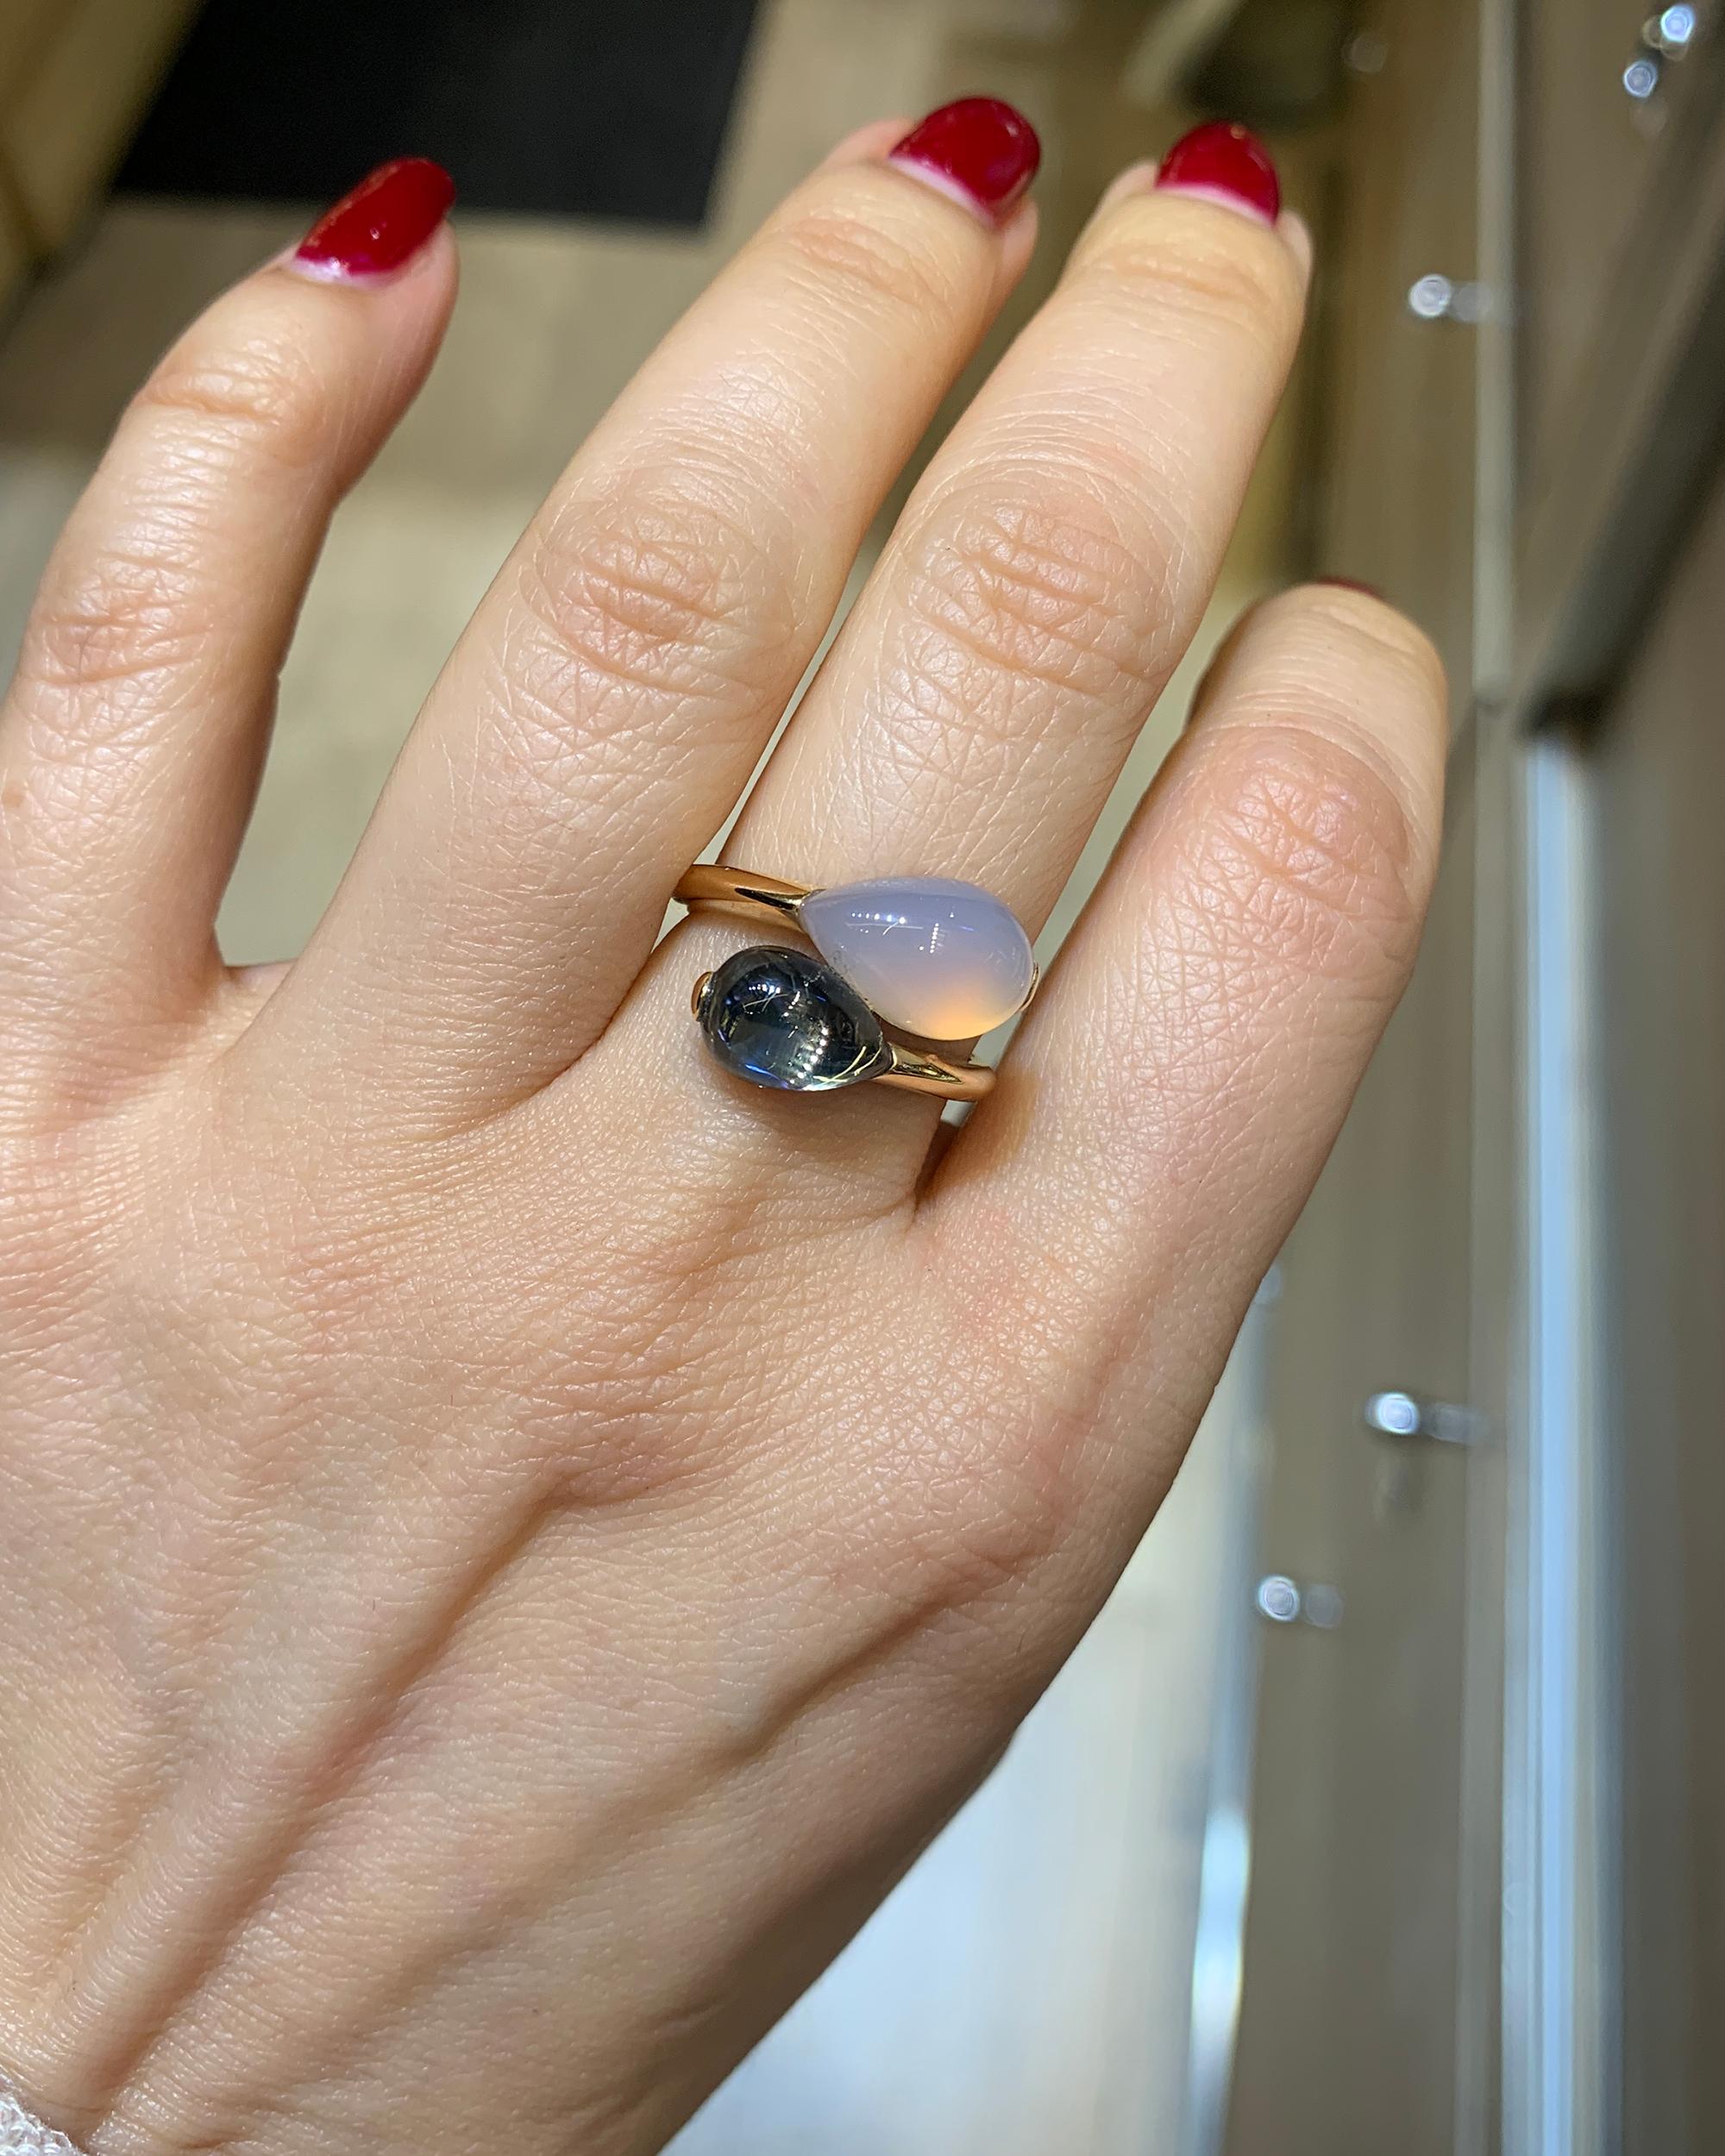 A stylish ring for everyday wear. 
It's made in Italy by Fecarotta jewelers.
It is designed as a twin ring featuring a 2.87 carat cabochon blue topaz and 3.98 carat cabochon quartz.
The metal is 18K rose gold.
Size 6.75